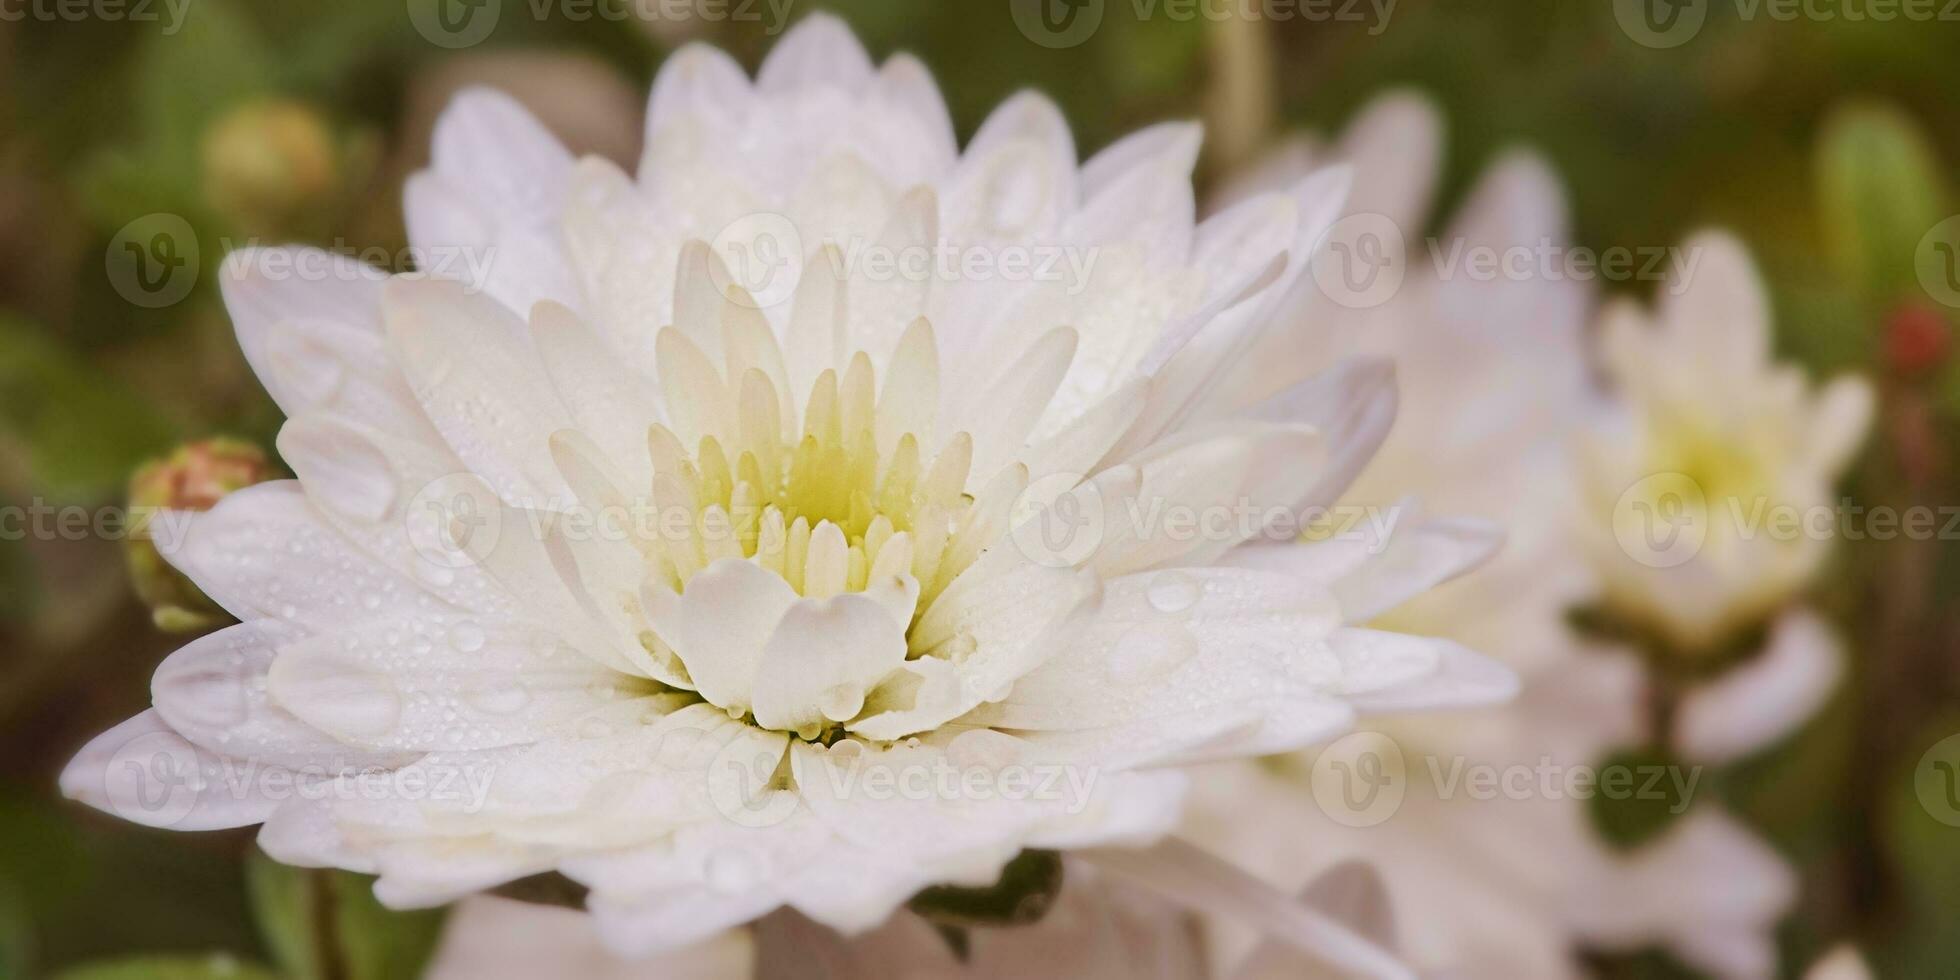 White chrysanthemum closeup with water drops. Autumn blooming flowers. photo